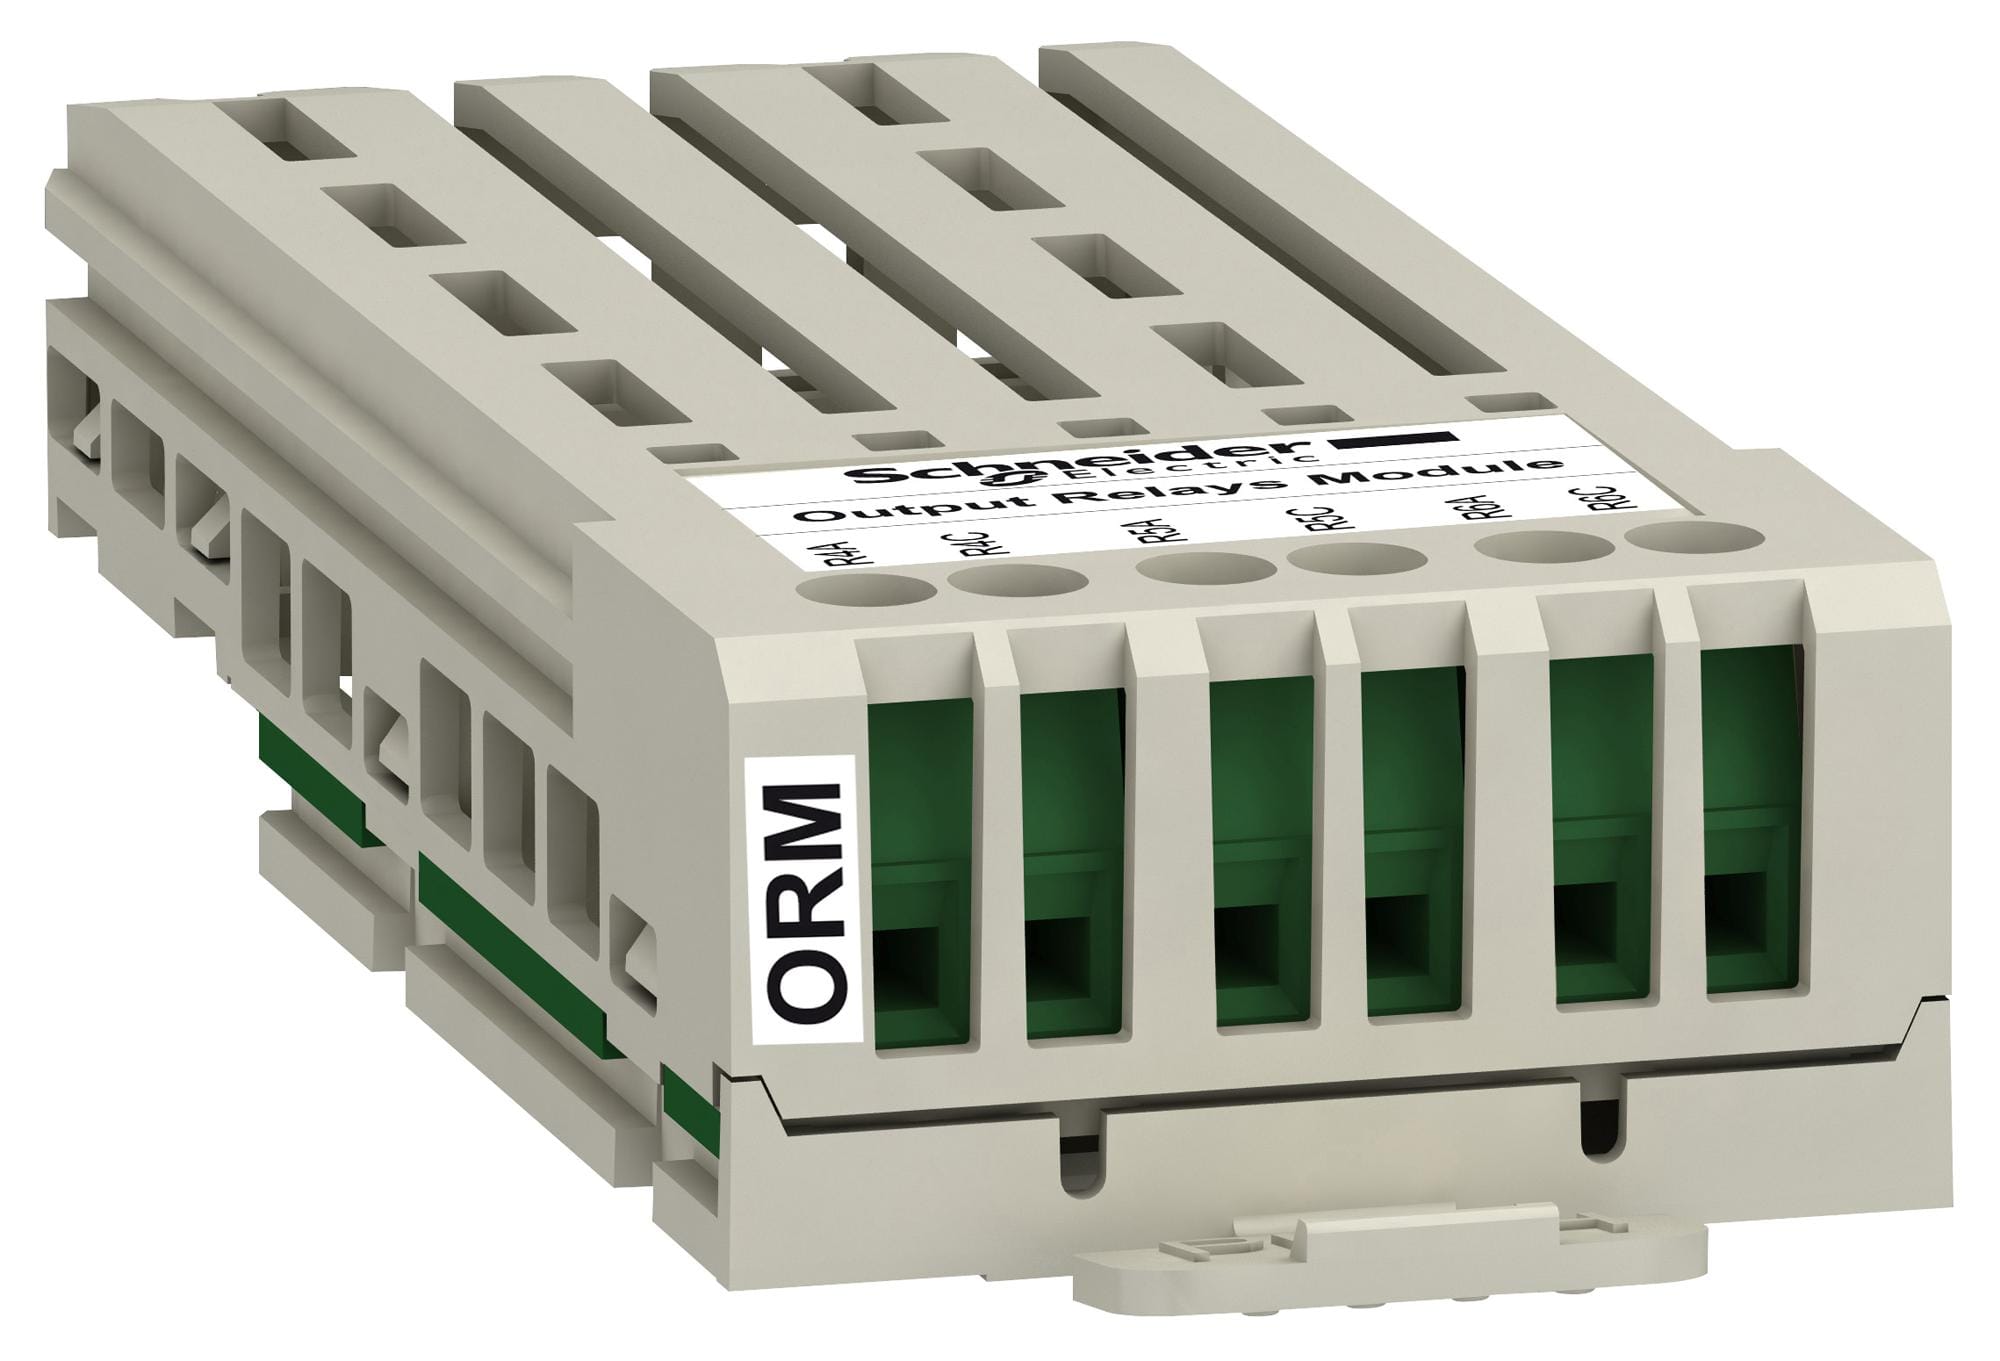 VW3A3204 EXTENDED RELAY MODULE, VAR SPEED DRIVE SCHNEIDER ELECTRIC